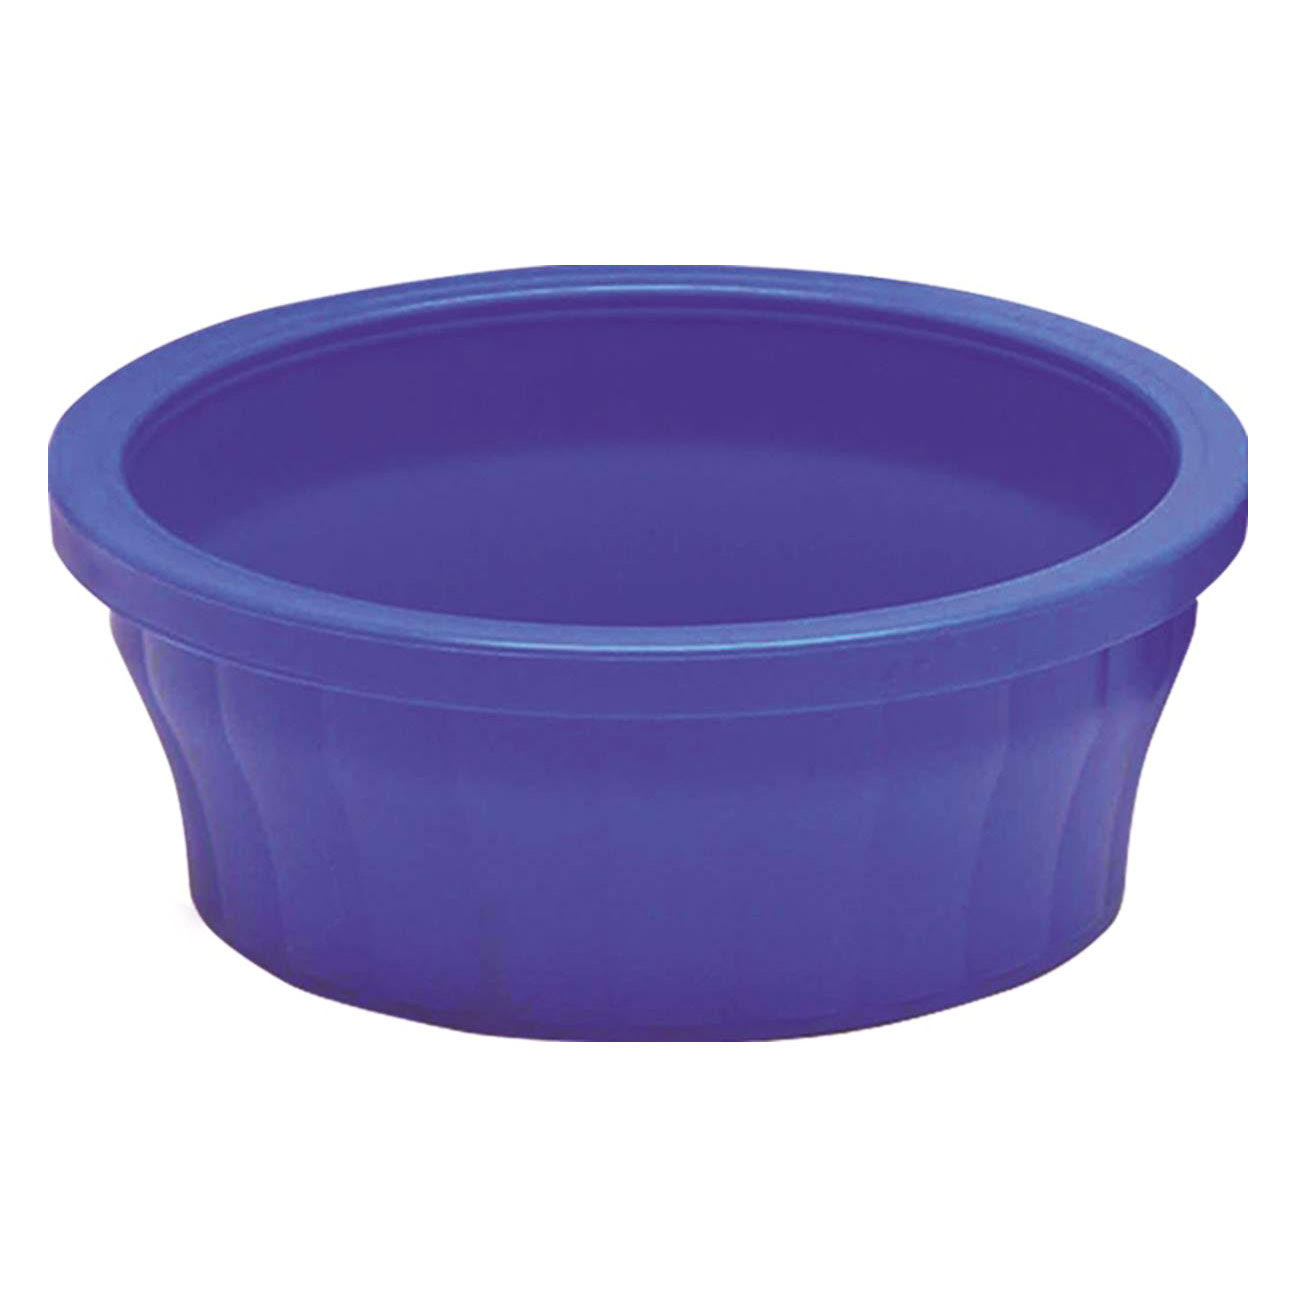 Super Pet Small Animal Cool Crock Food and Treat Bowl - Large